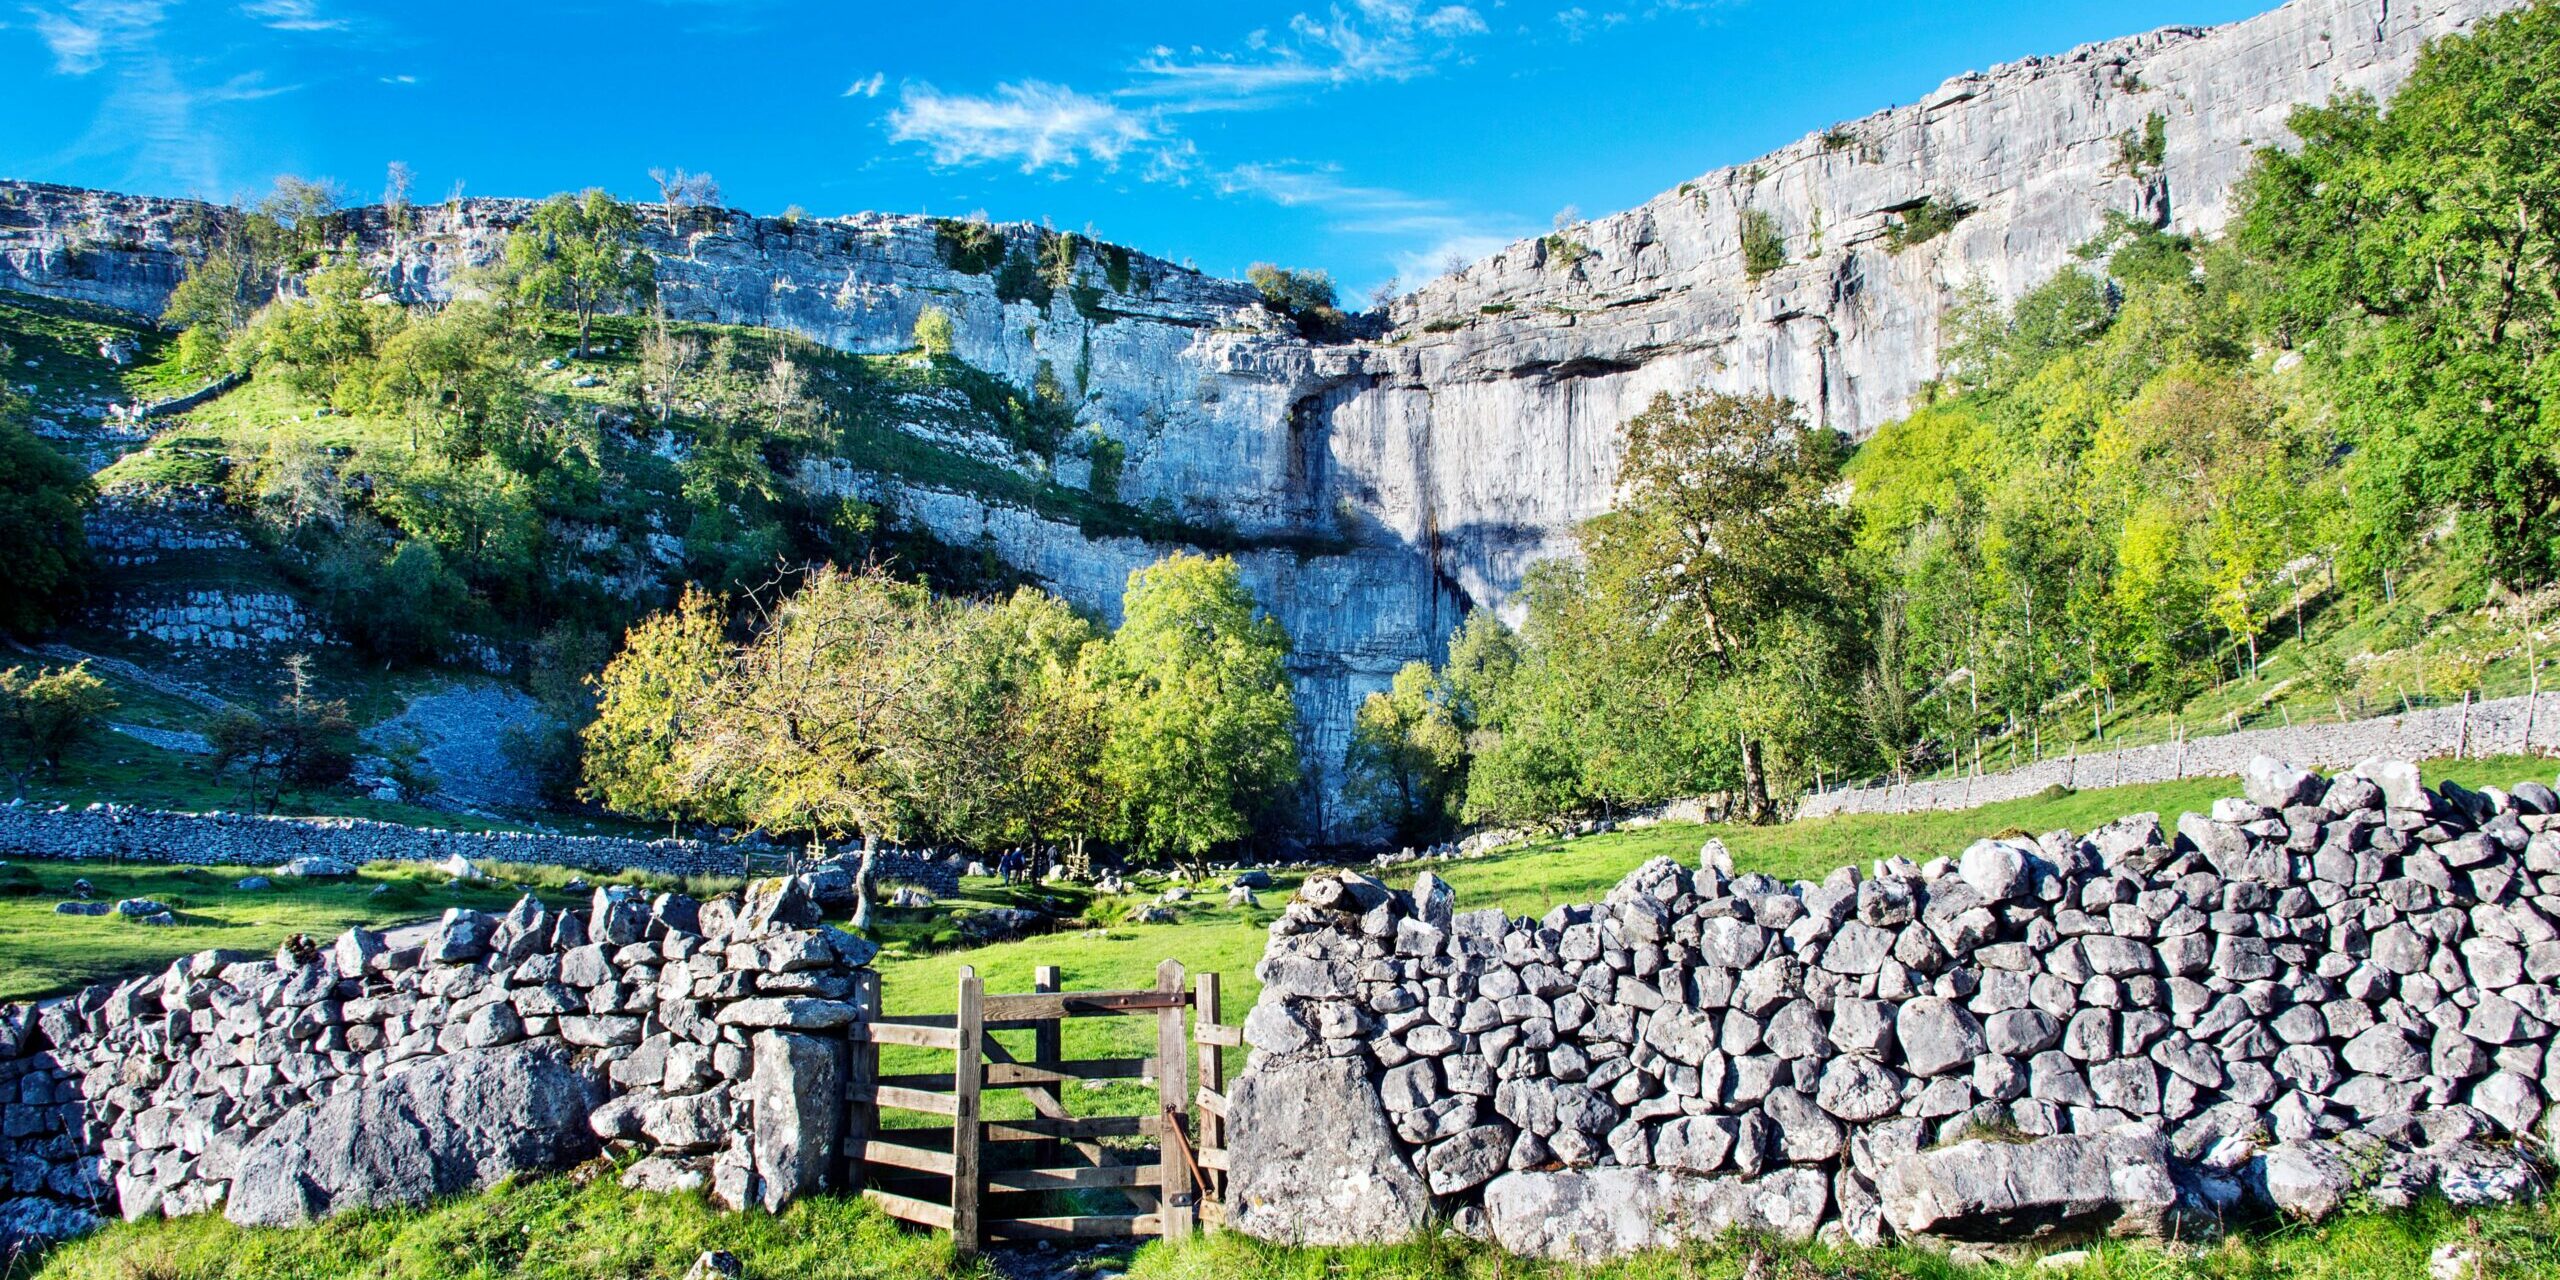 Malham Cove, a large vertical ampitheatre shaped cliff face formation in the Pennines